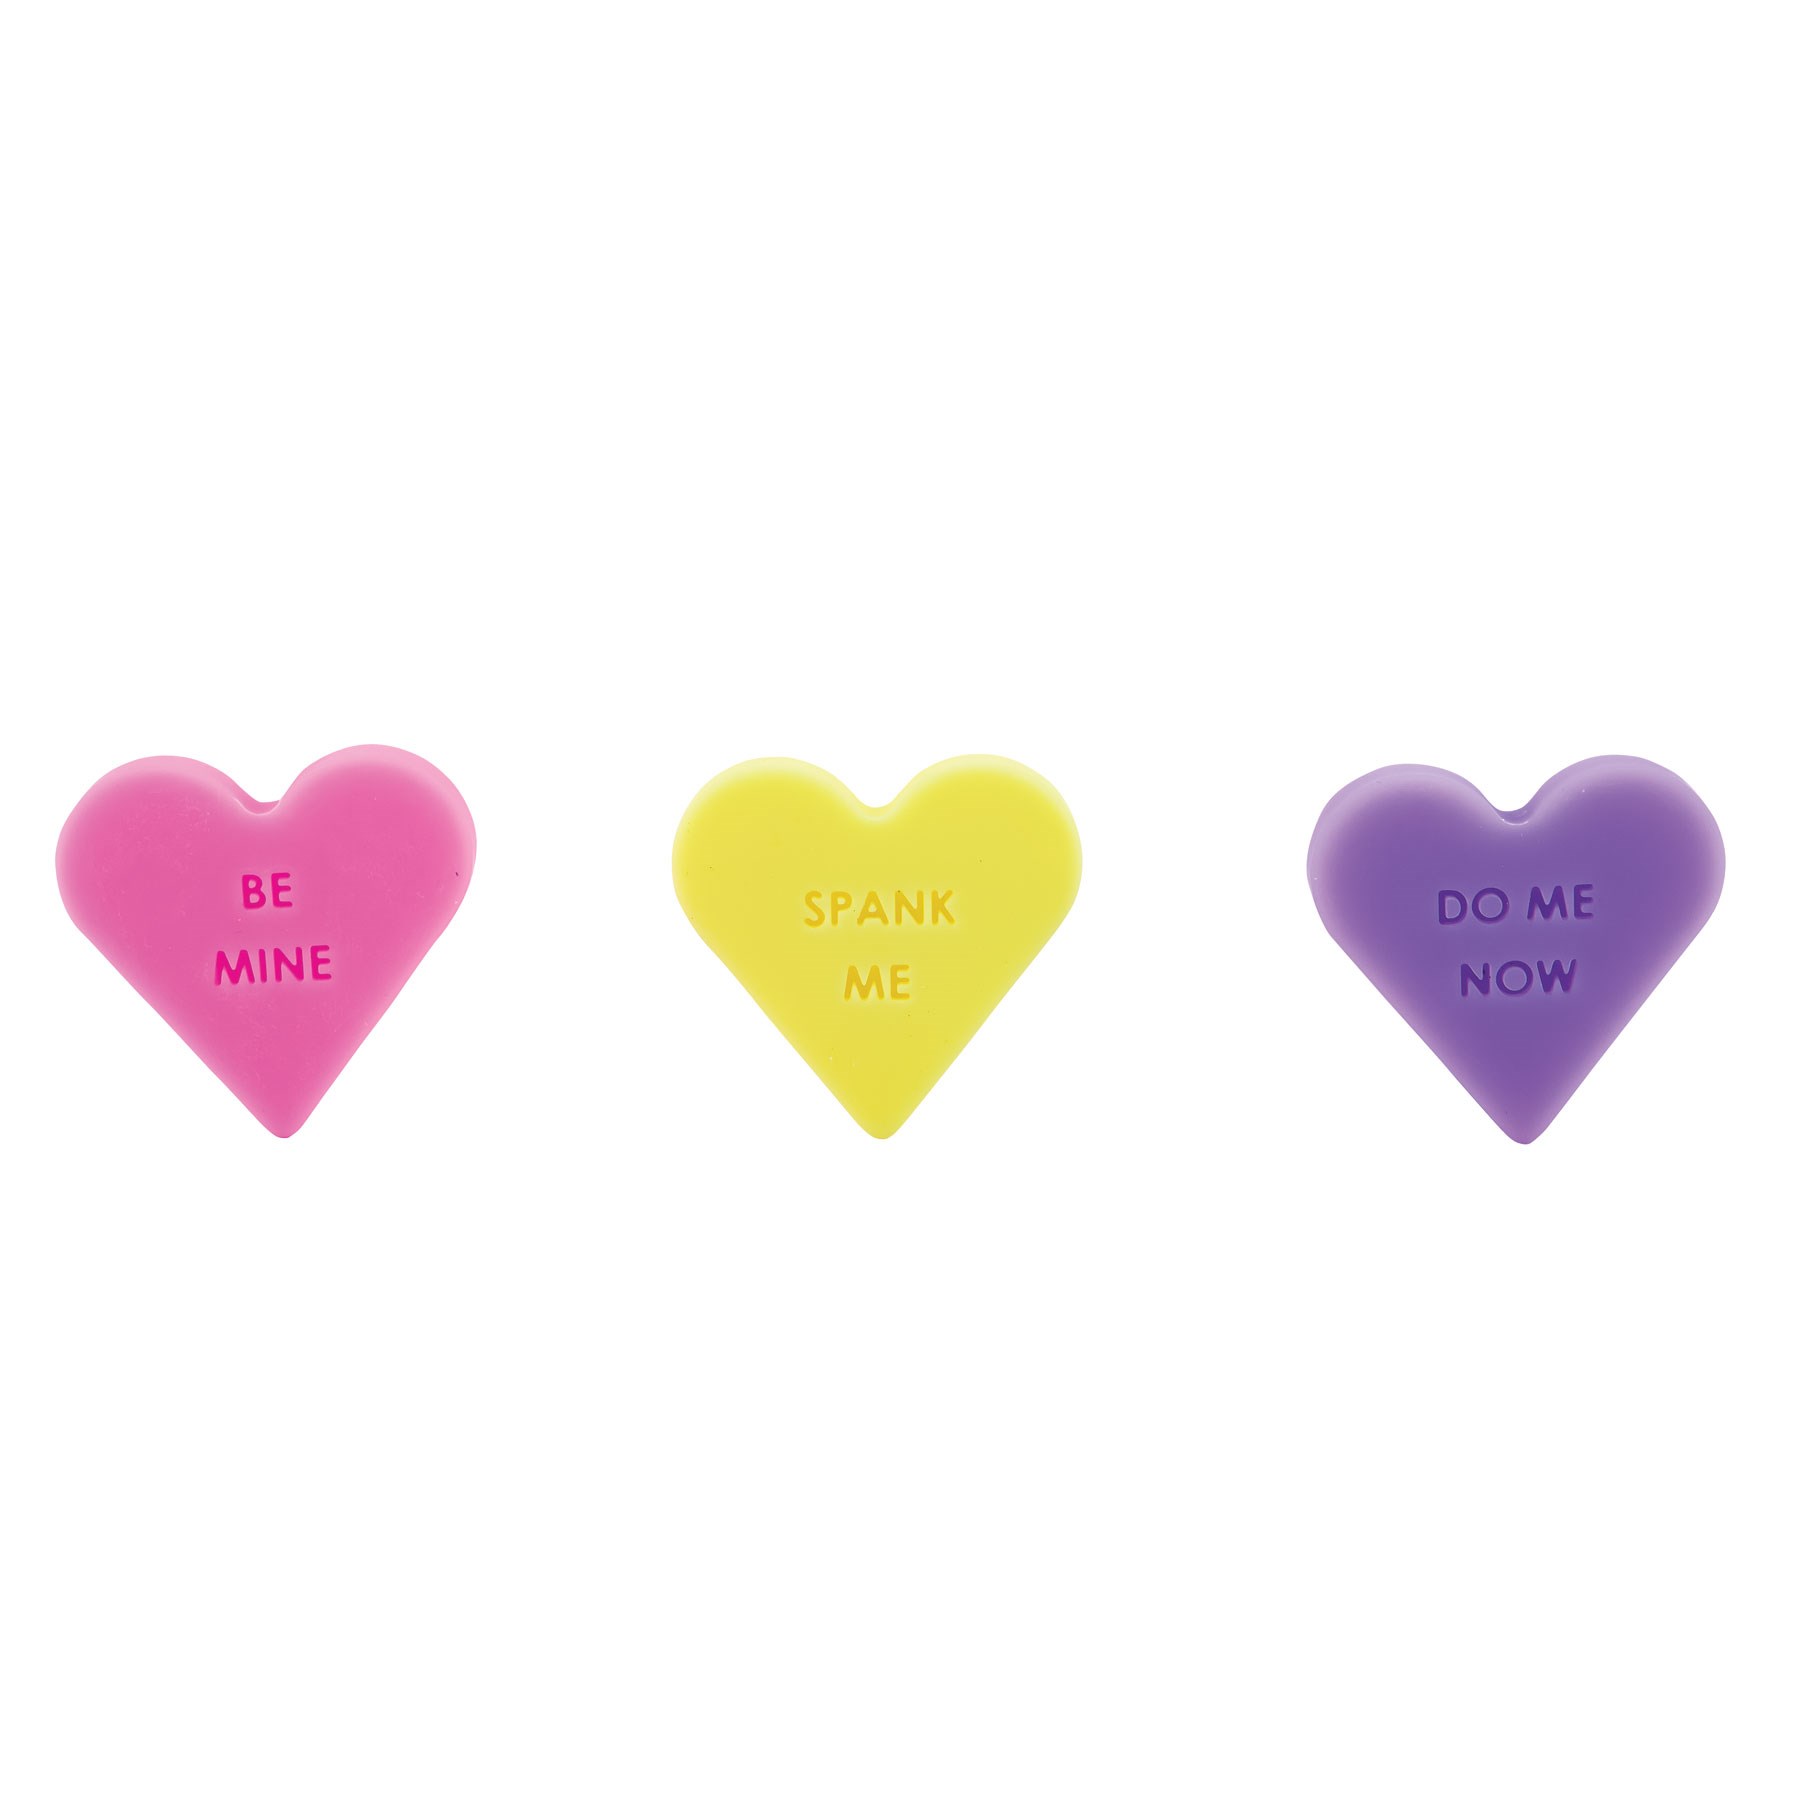 Naughty Candy Heart Butt Plug bases showing stamped messages